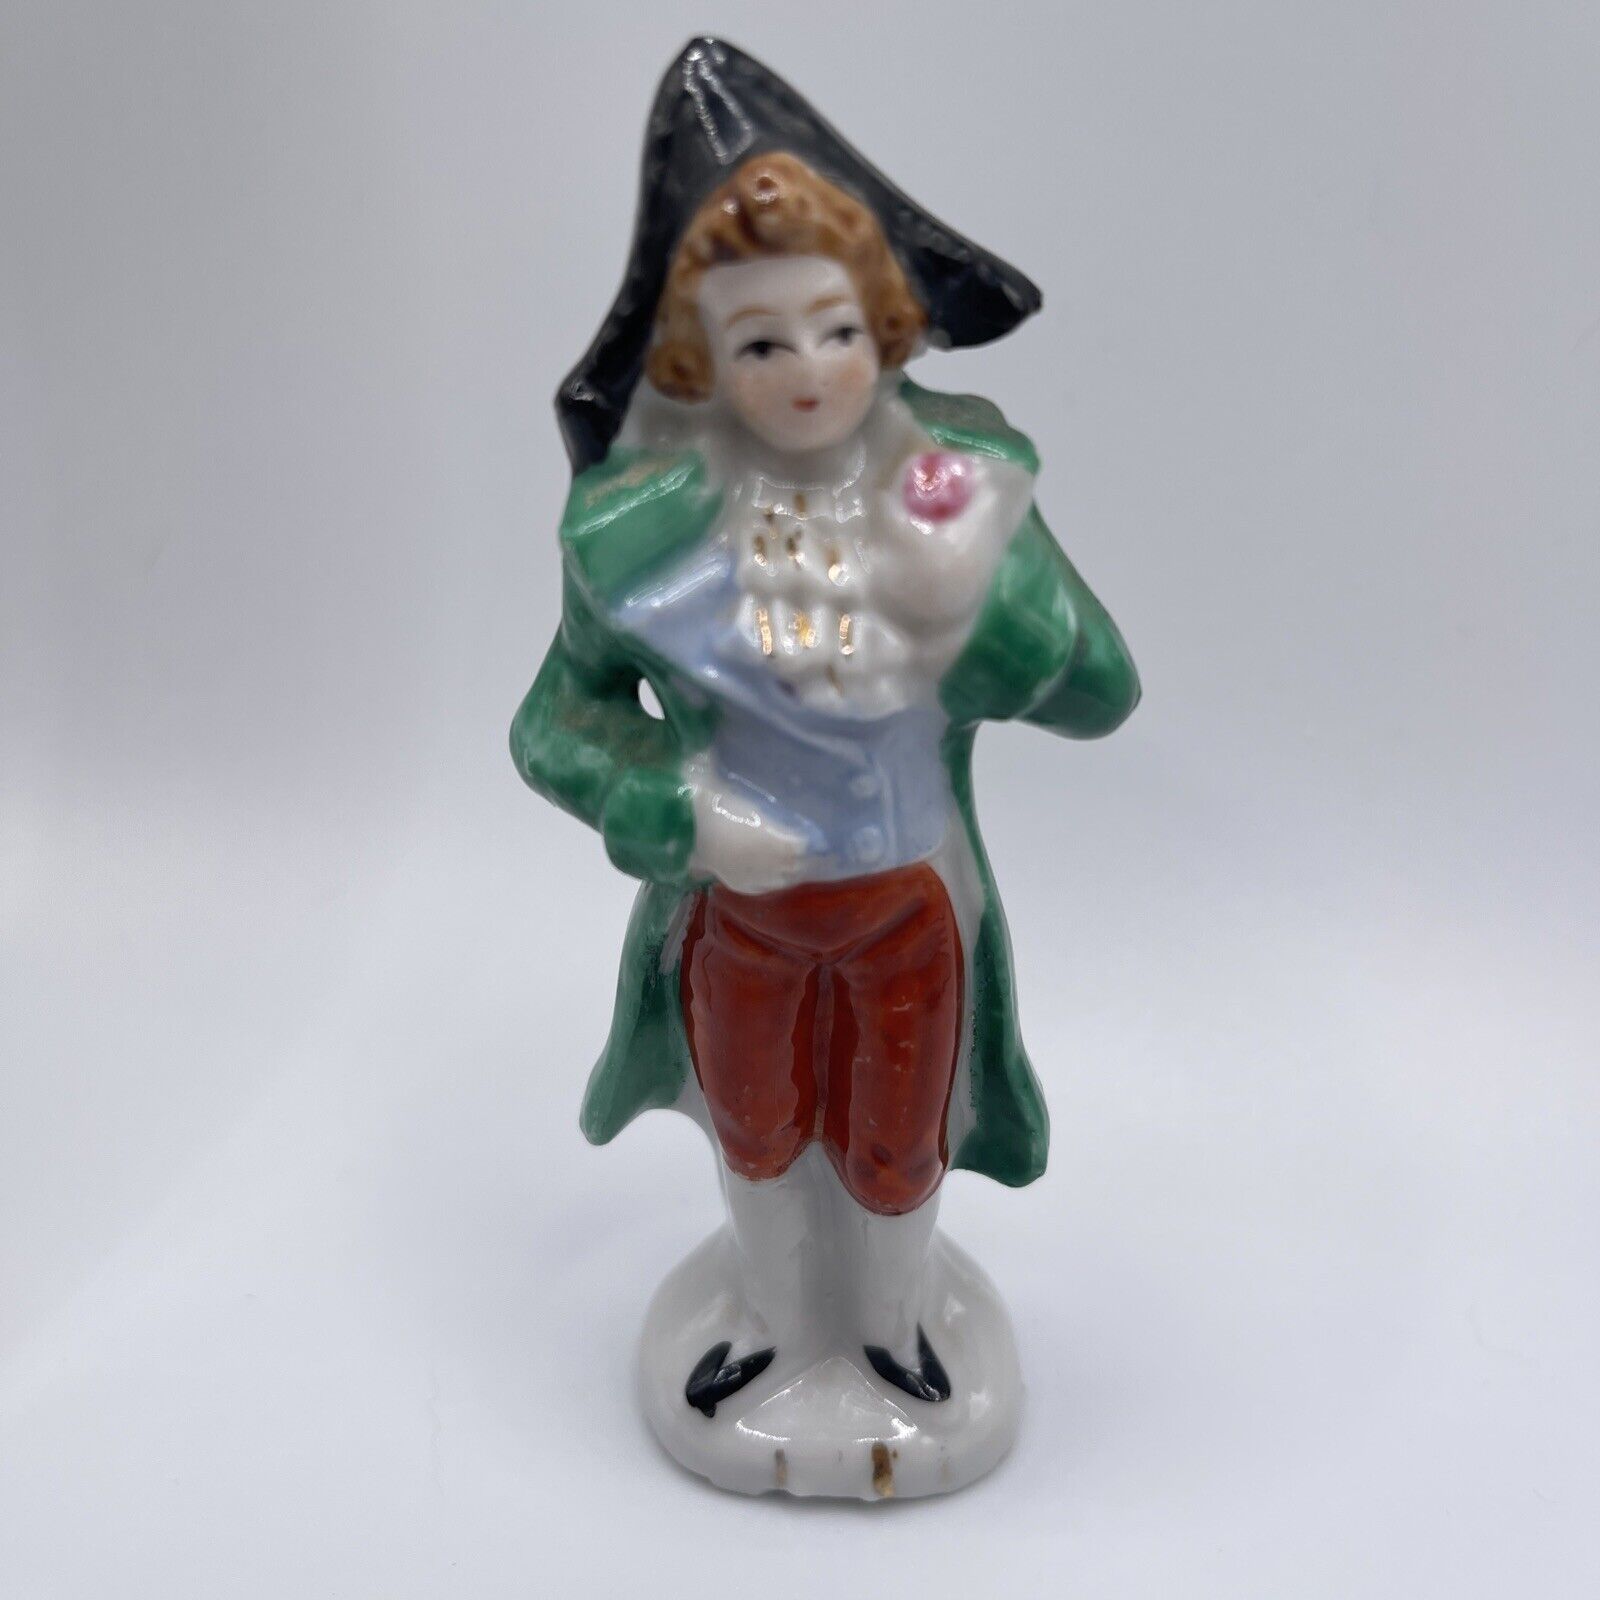 Vintage Colonial Porcelain Figurine Made in Japan 4 Inch